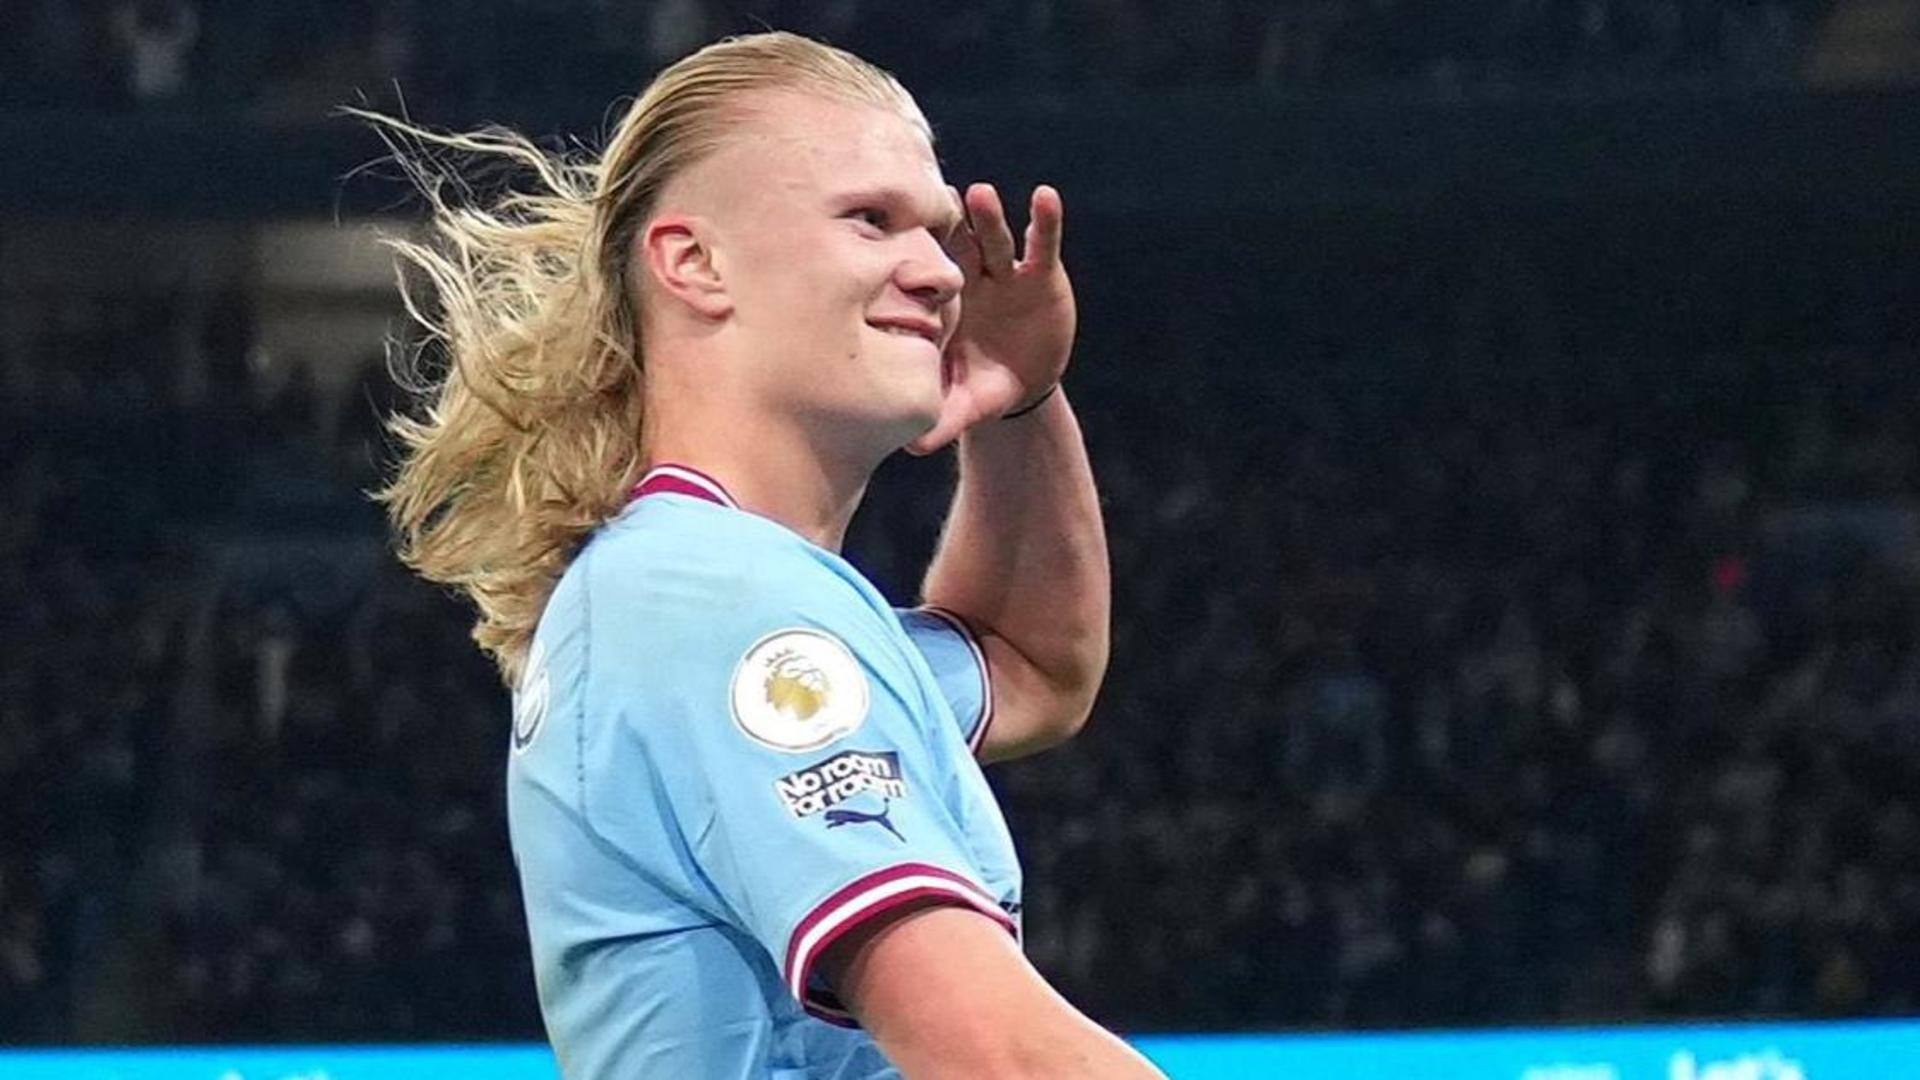 Erling Haaland races to 50 goals for Manchester City: Stats